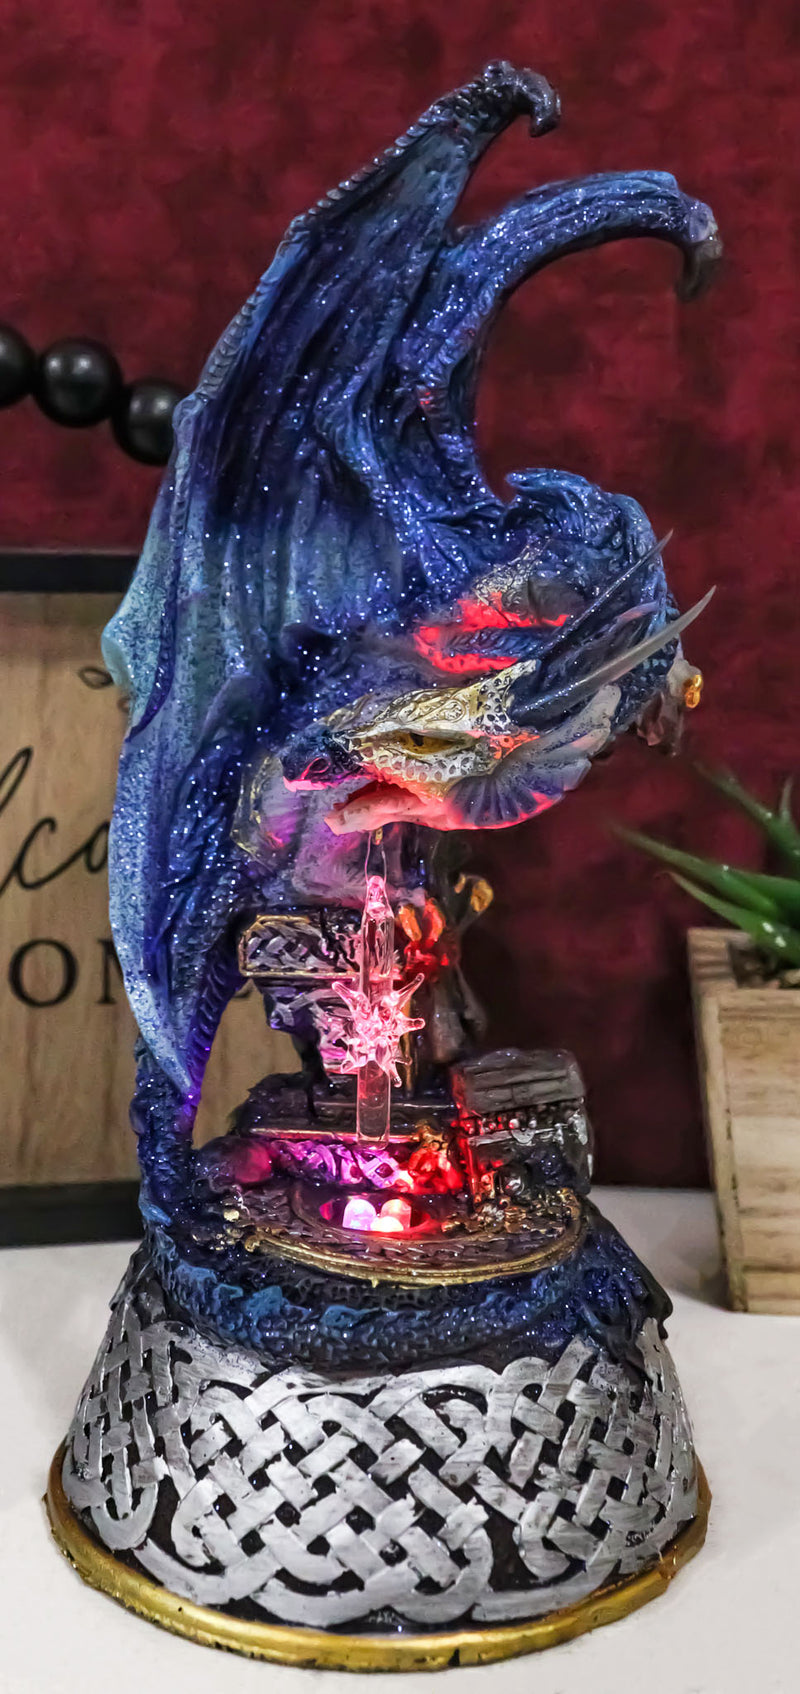 Midnight Armored Dragon On Celtic Knot Pedestal Figurine With LED Crystal Light